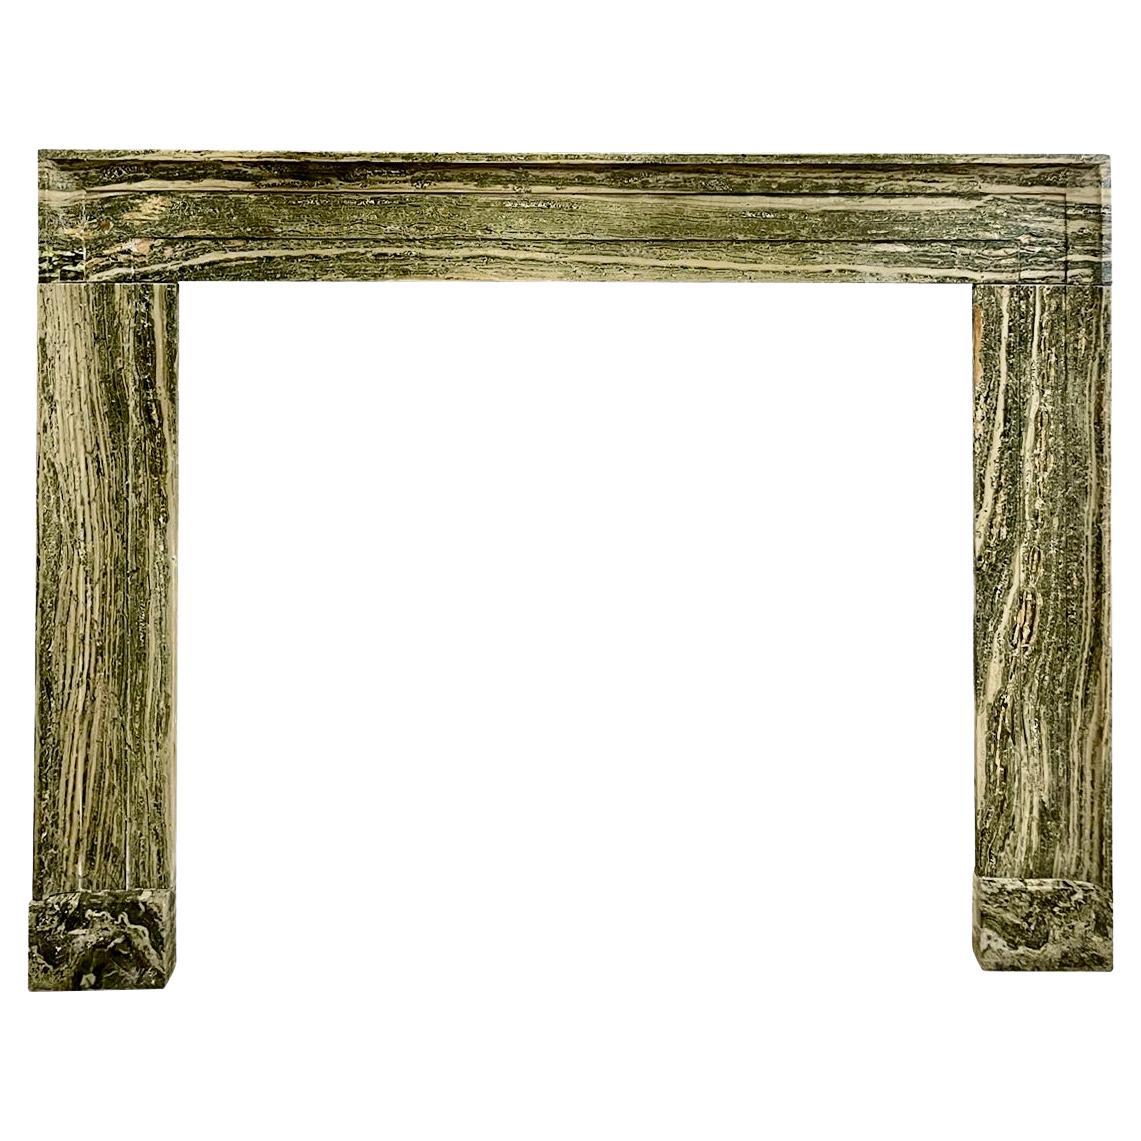 Late 18th Century Irish Marble Bolection Fireplace Mantel For Sale